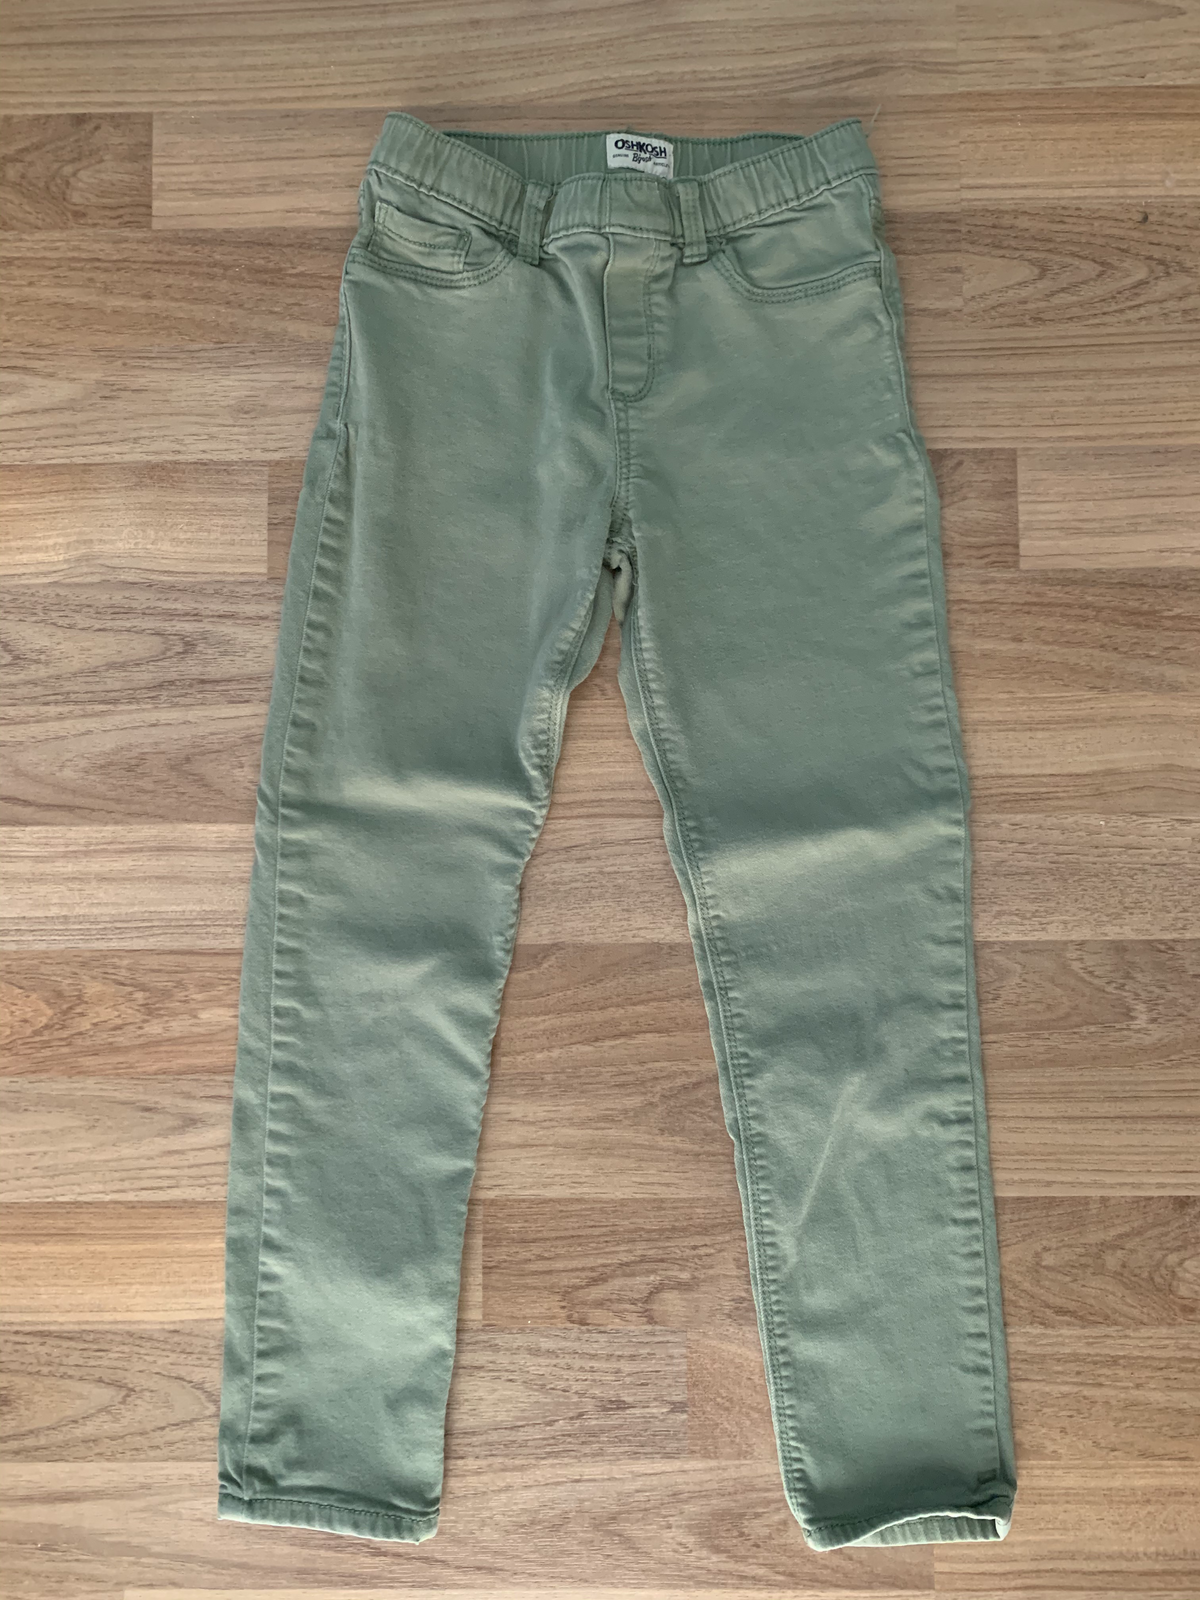 Pull Up Pants (Girls Size 7)